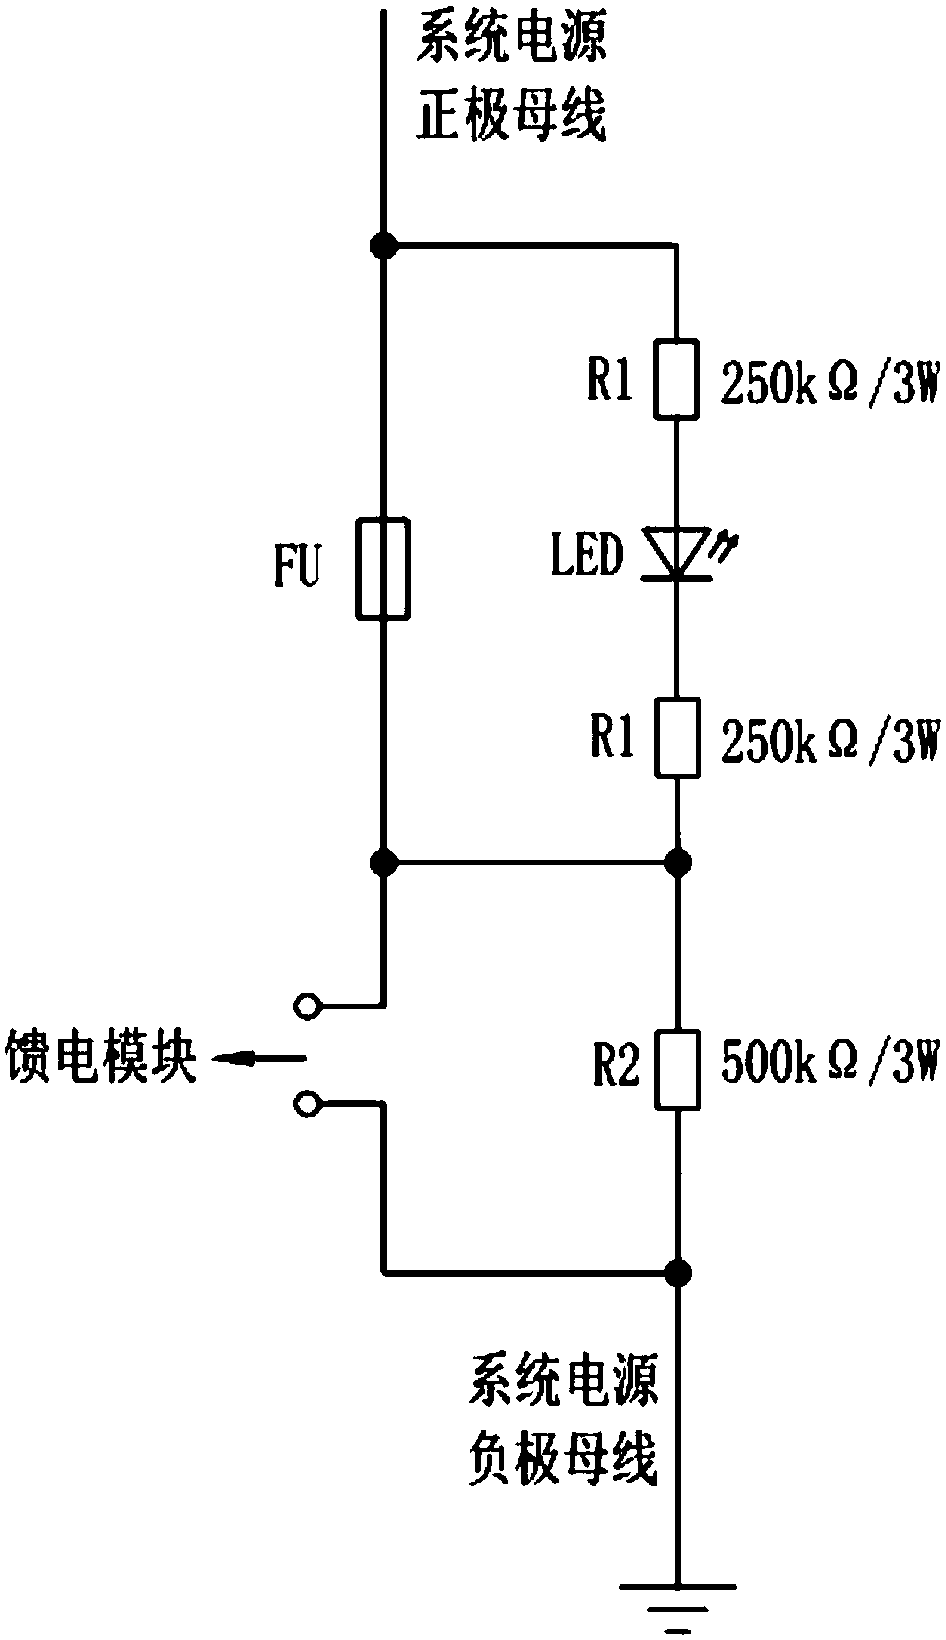 Feed short-circuit protector of sectionally continuous ground power supply system of electrical vehicle